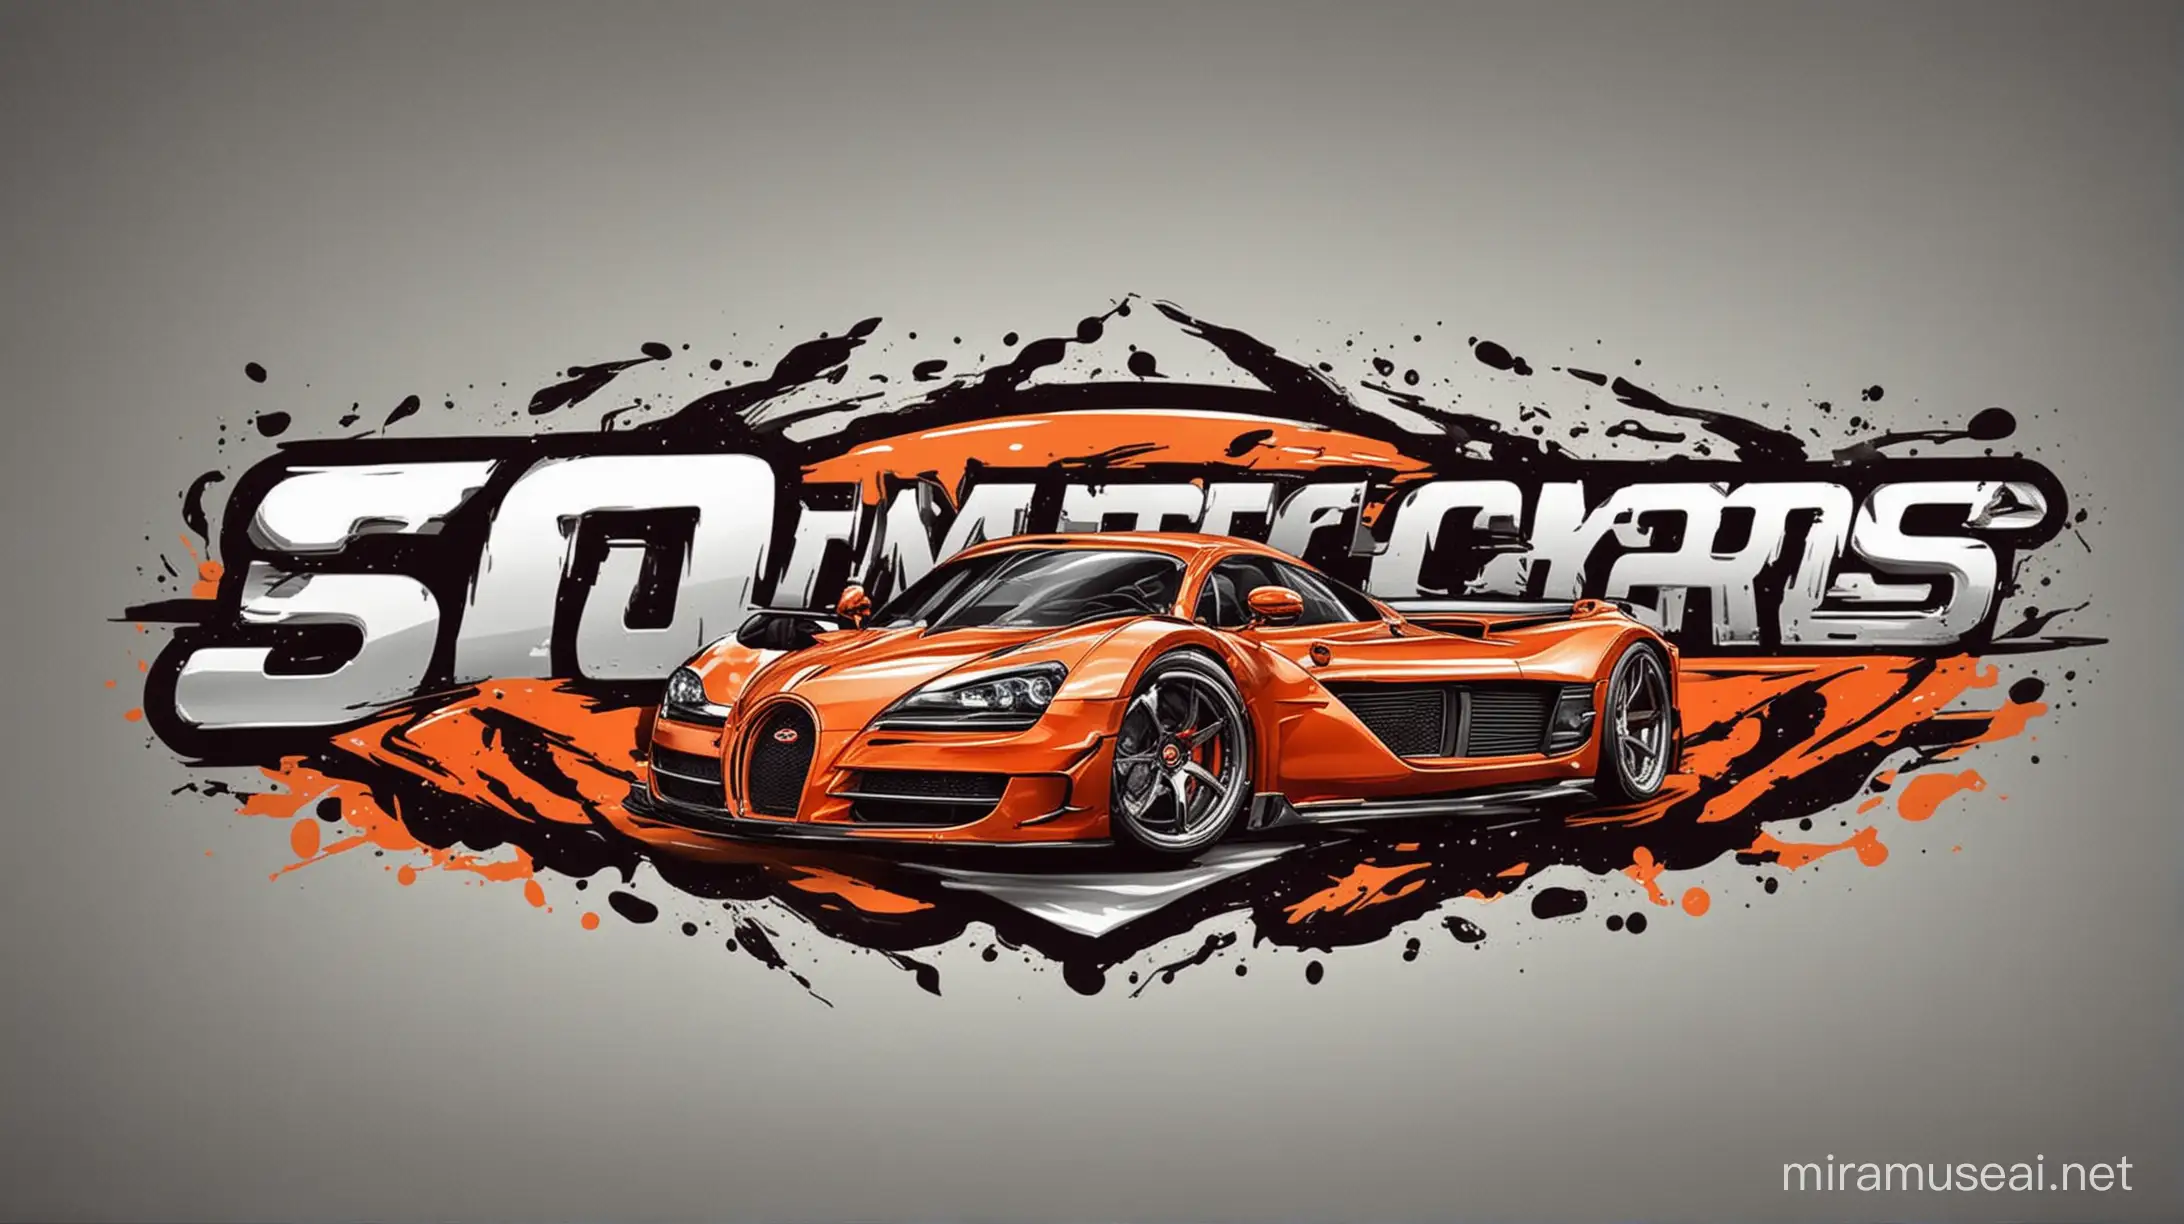 make me a banner with 50 cars logo and cars